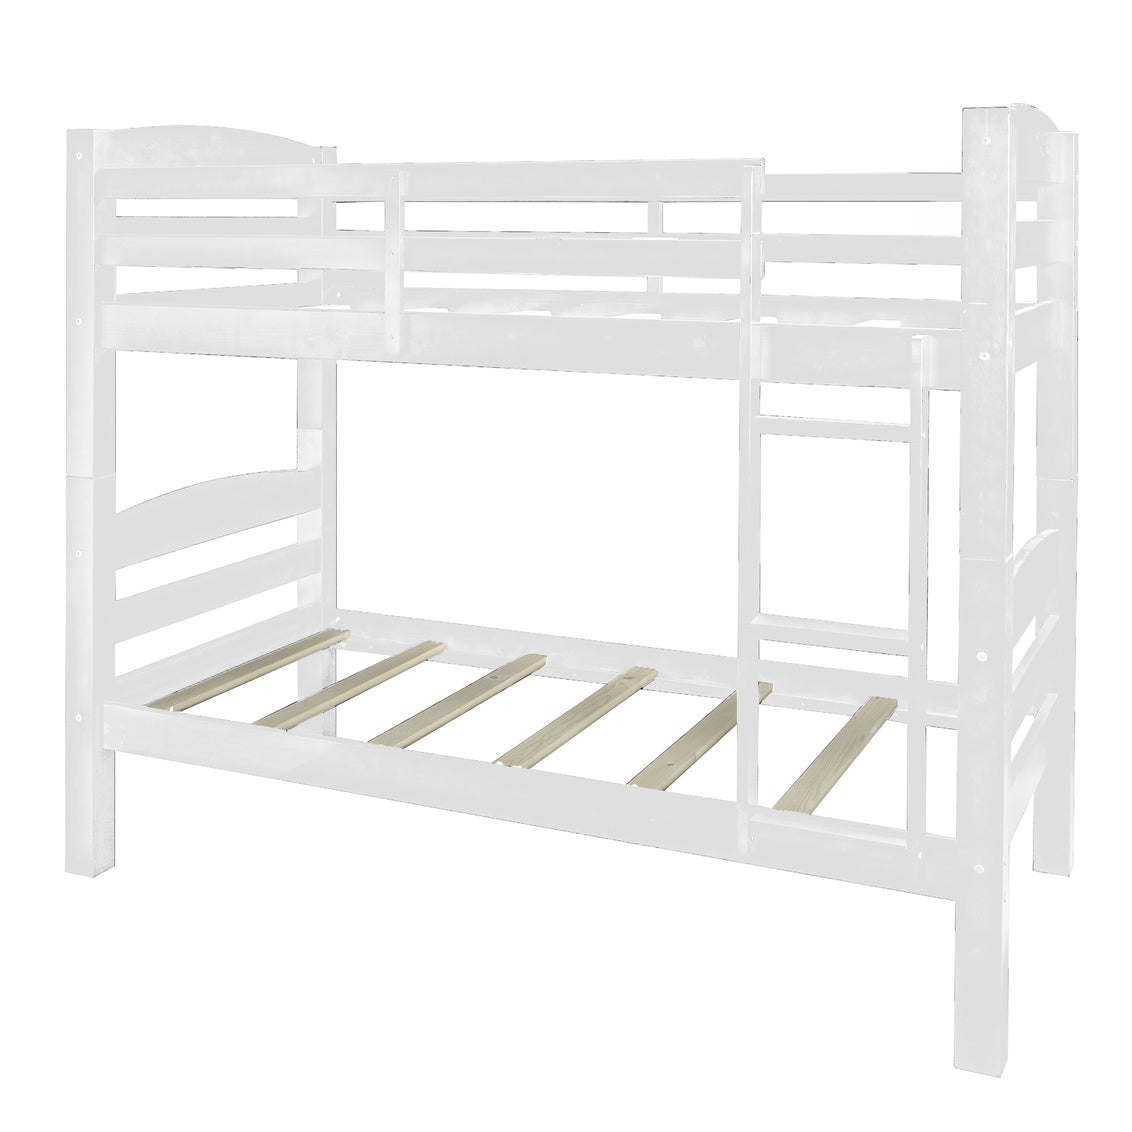 WEEKLY or MONTHLY. Porterhouse Twin over Twin Bunk in White